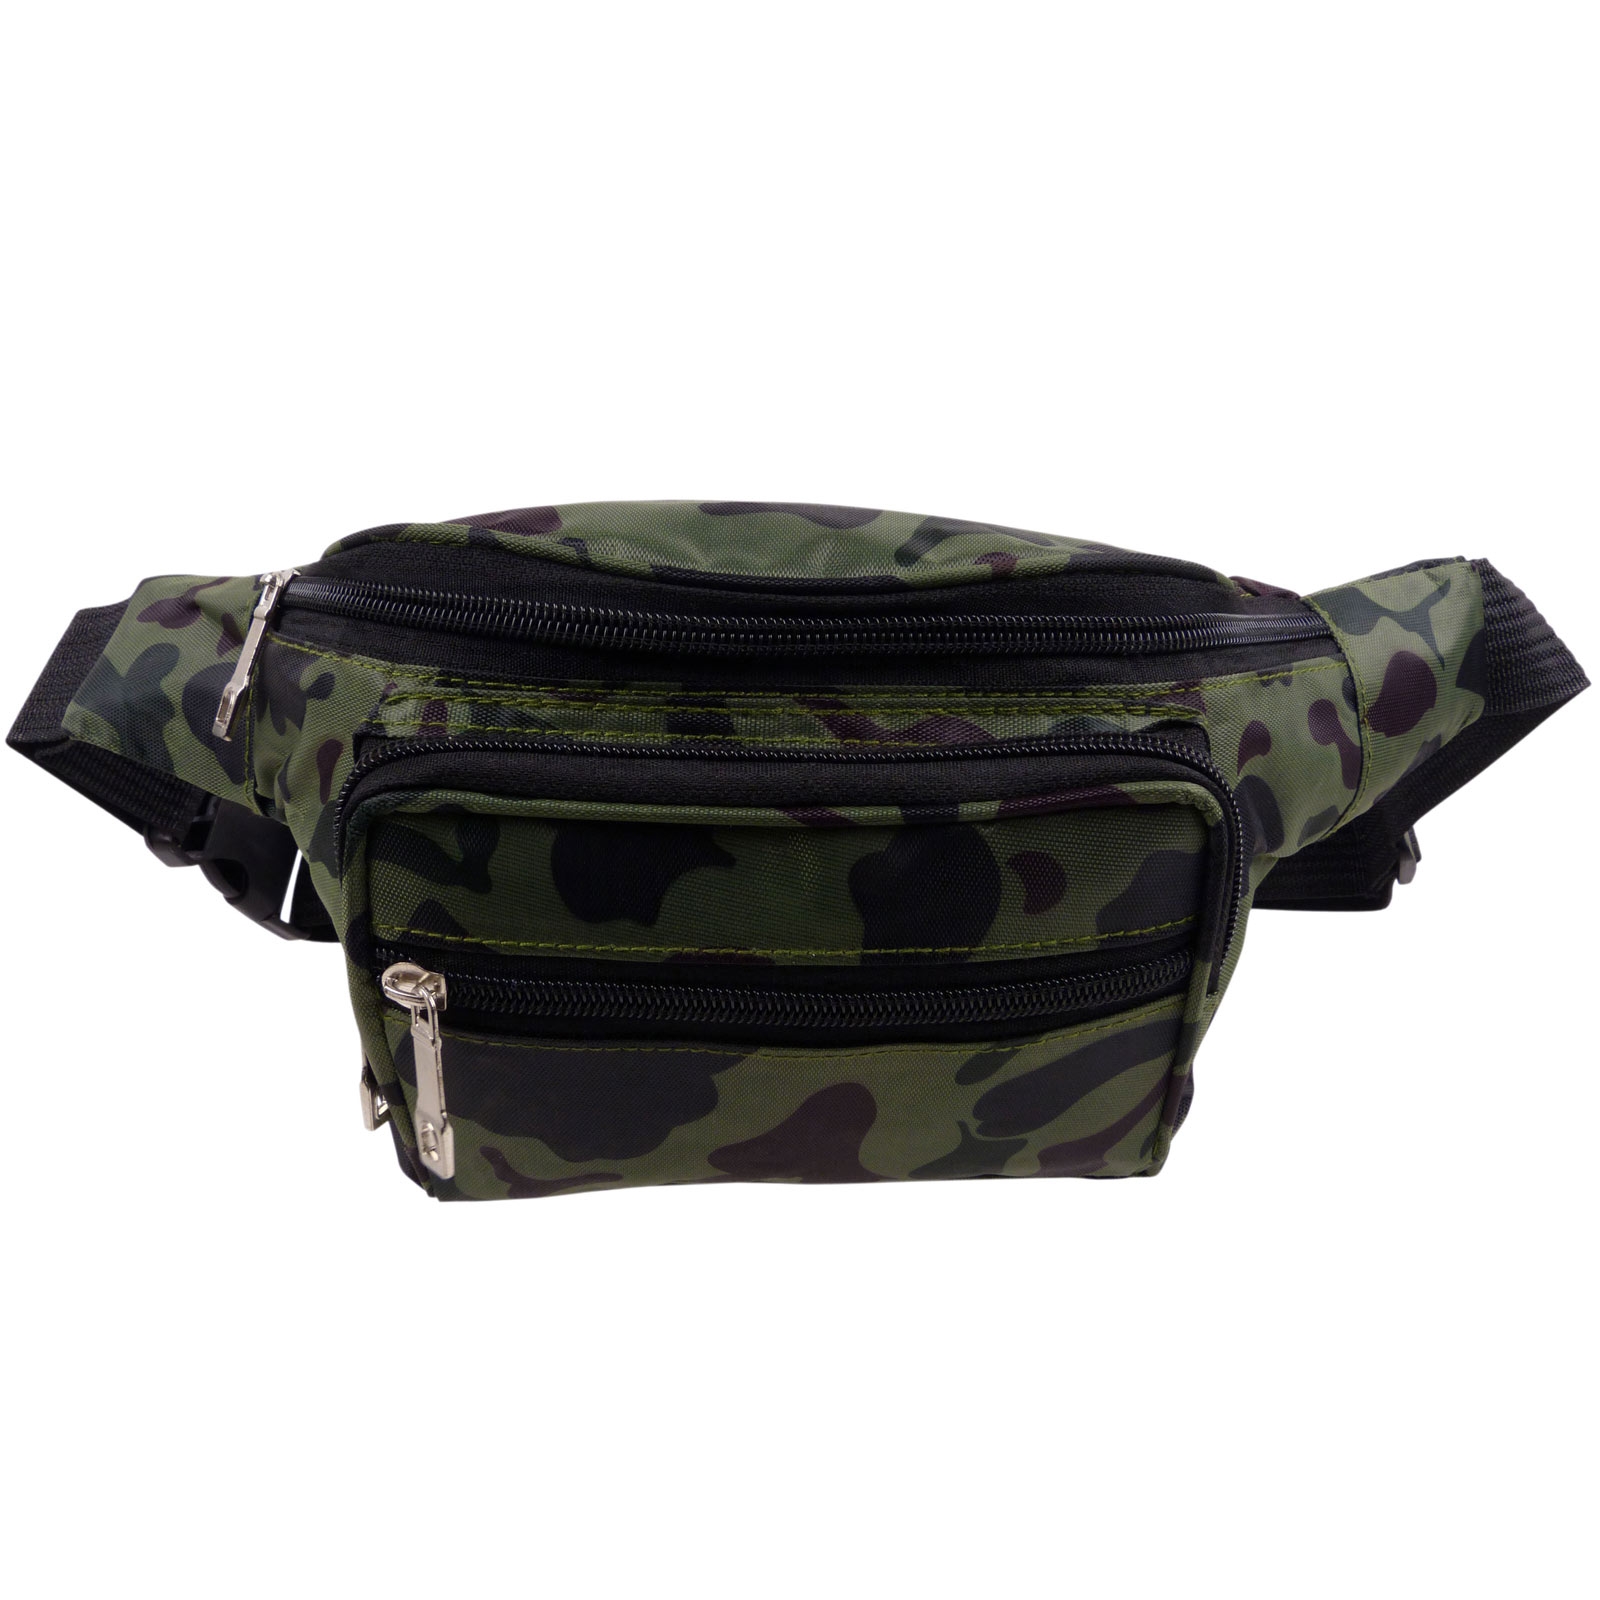 Camo Camouflage Army Nylon Bumbag Fanny Pack Travel Holiday Security ...